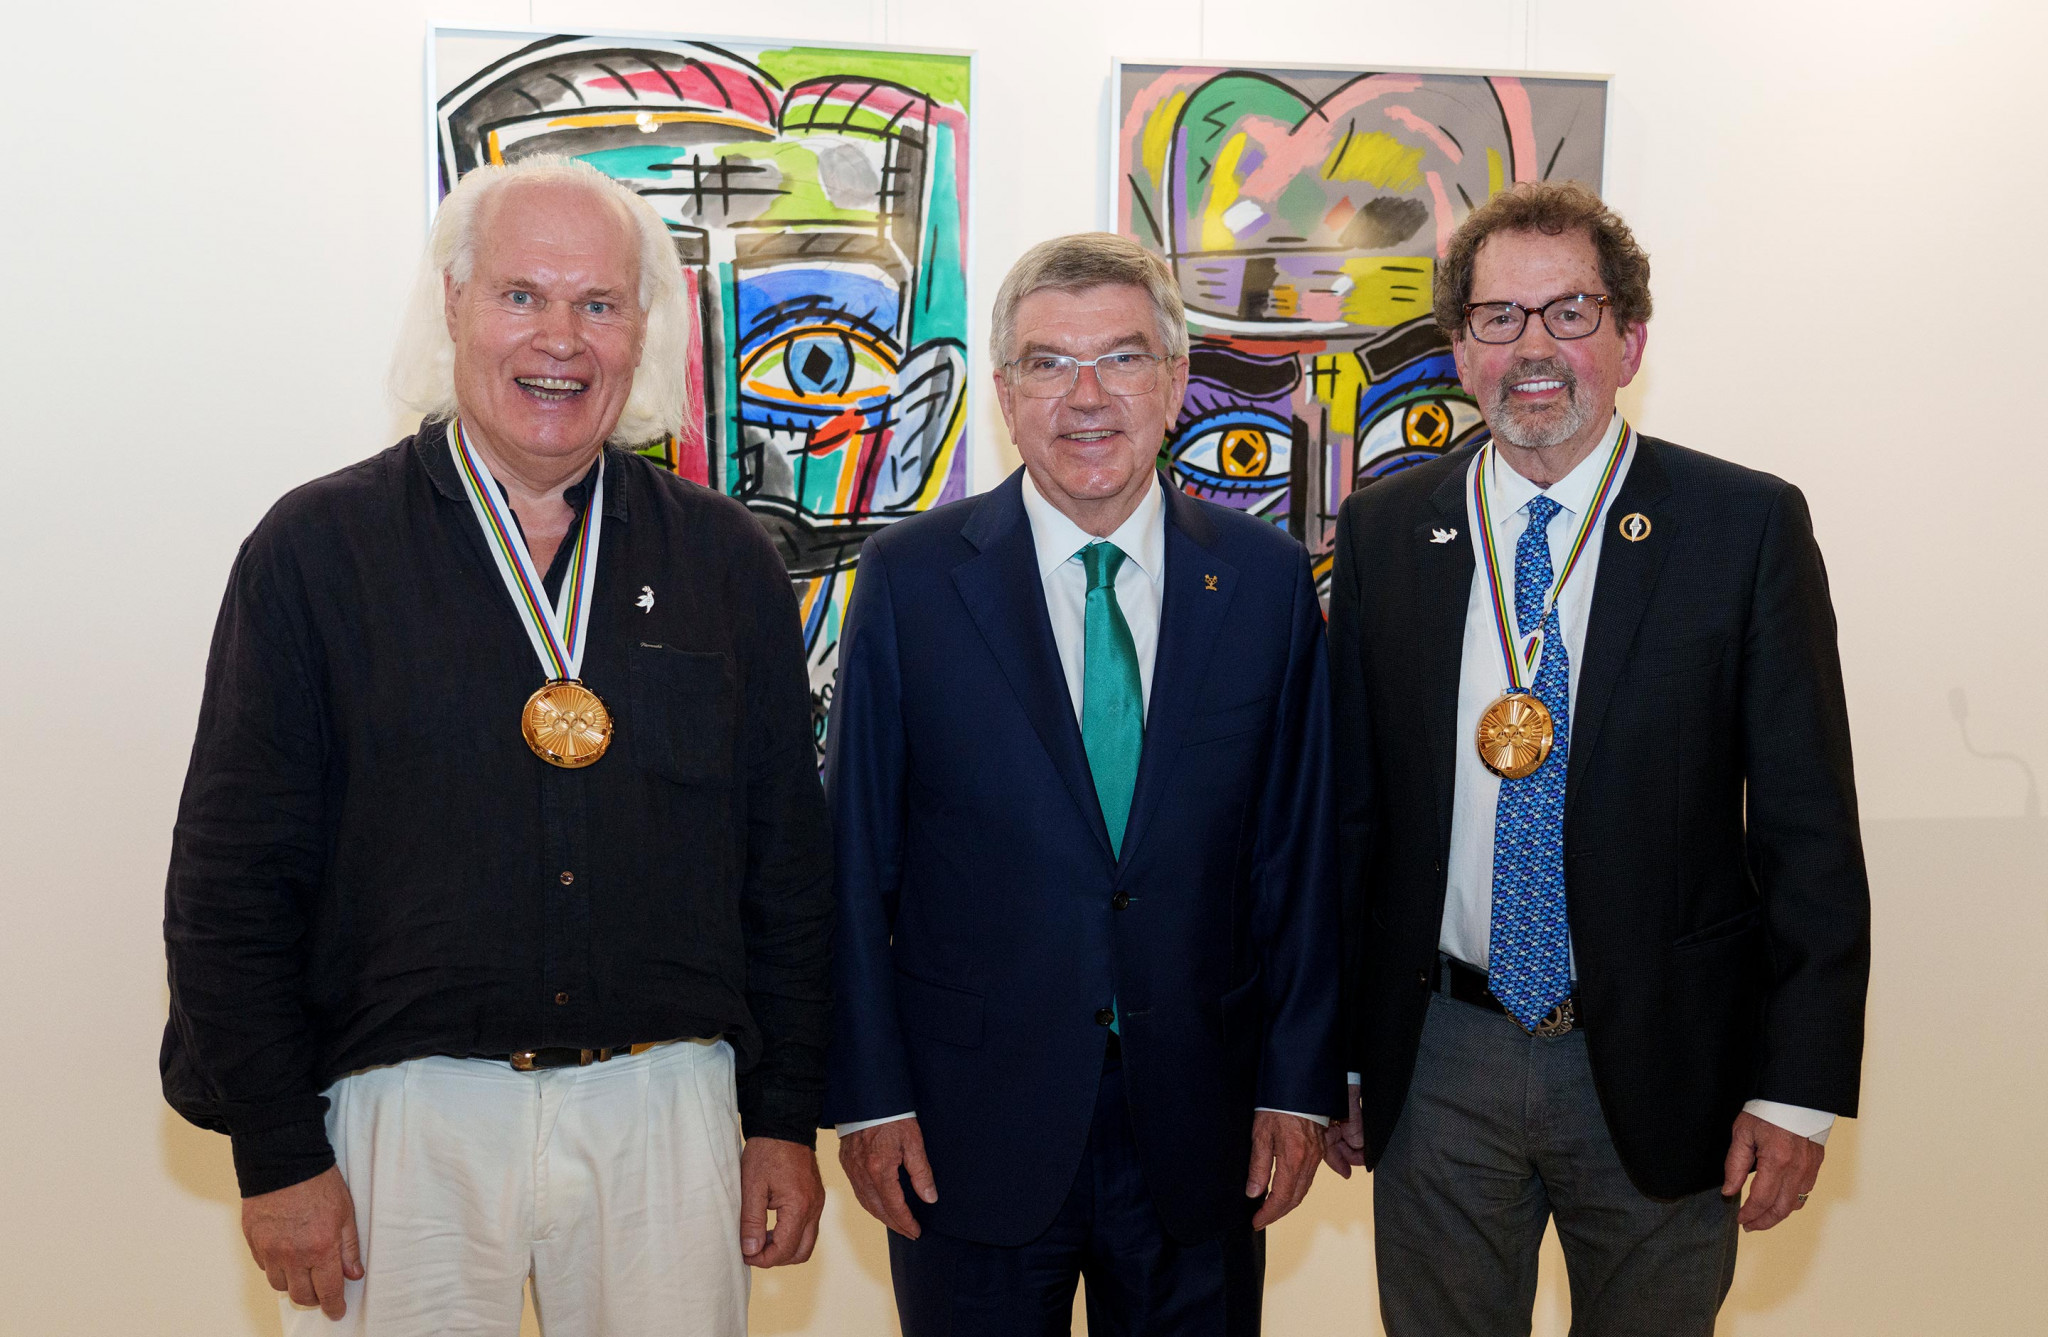 Thomas Bach flanked by German artist Rolf Lukaschewski and American writer George Hirthler at the award ceremony in Lausanne ©IOC/Greg Martin